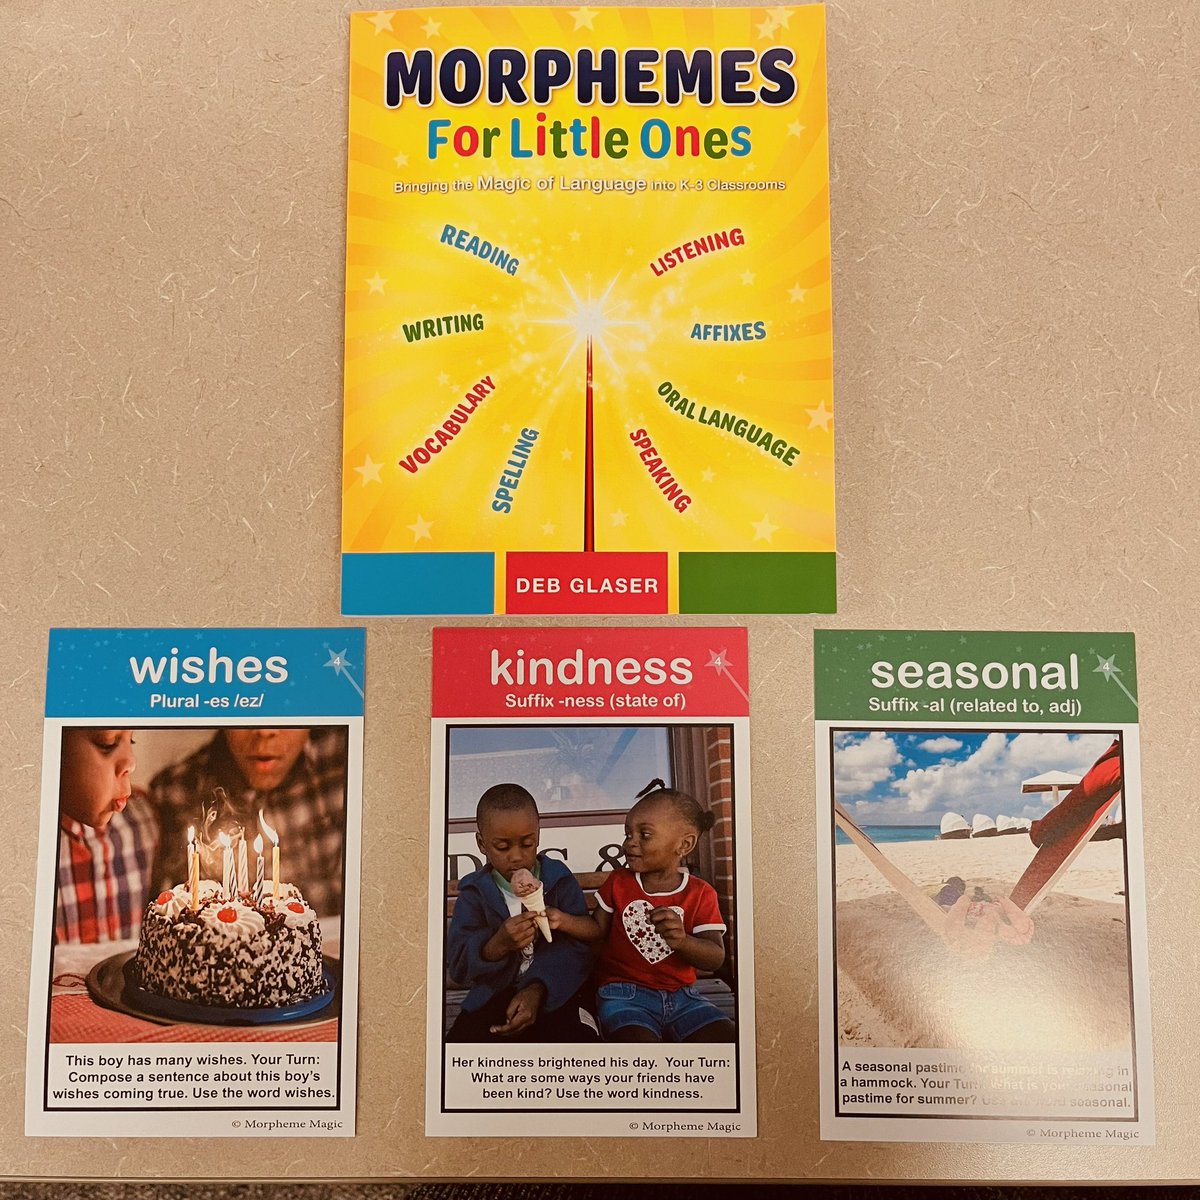 📙I have just started to explore Morphemes for Little Ones by Deb Glaser for Kindergarten to Grade 3 and it looks like it could be a great resource. 💛Do you use it in your classroom? If so, what do you think of the resource? #Literacy #EduTwitter #Morphology